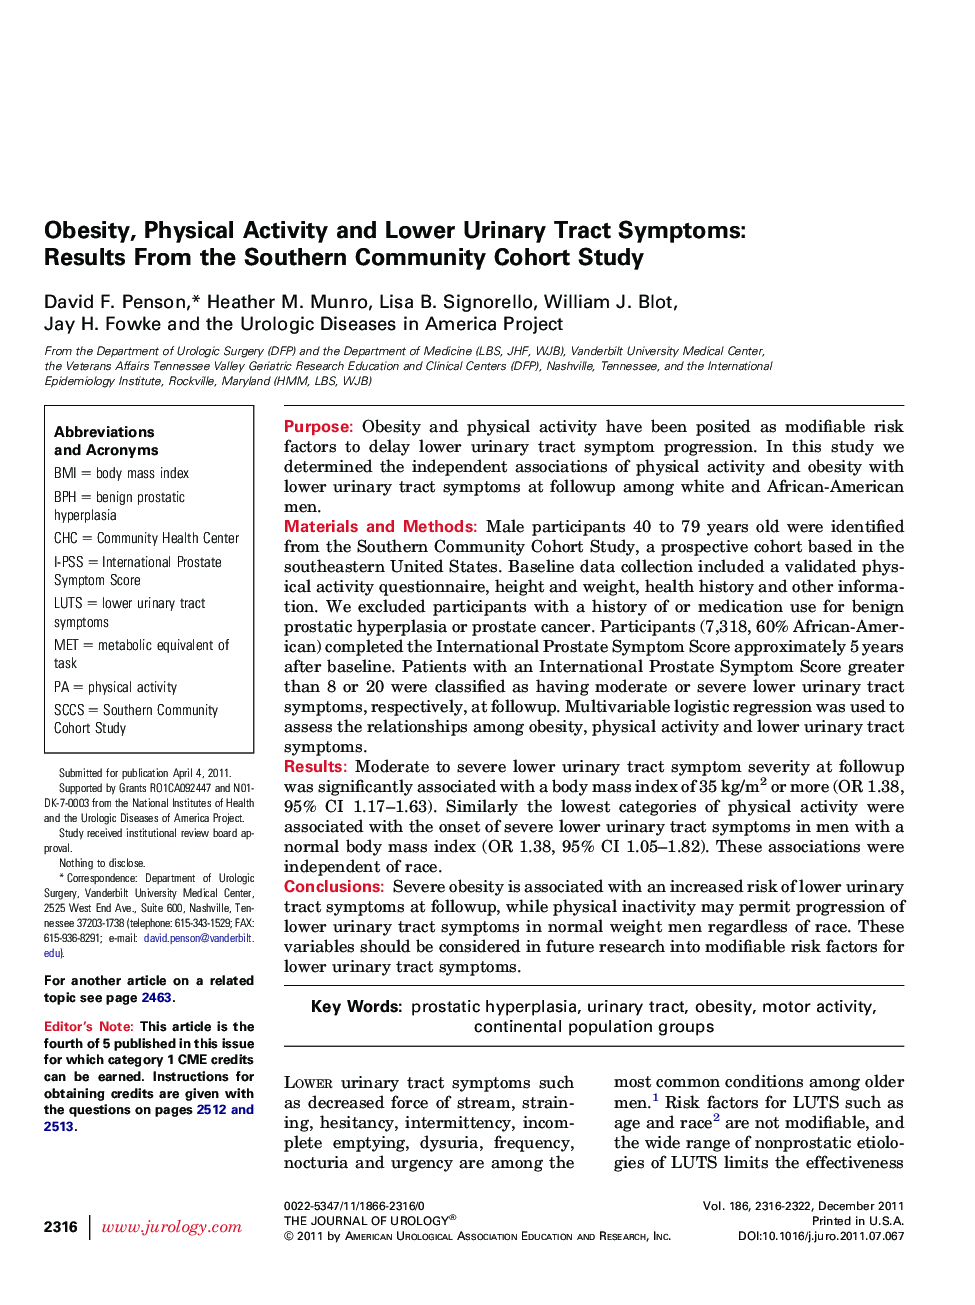 Obesity, Physical Activity and Lower Urinary Tract Symptoms: Results From the Southern Community Cohort Study